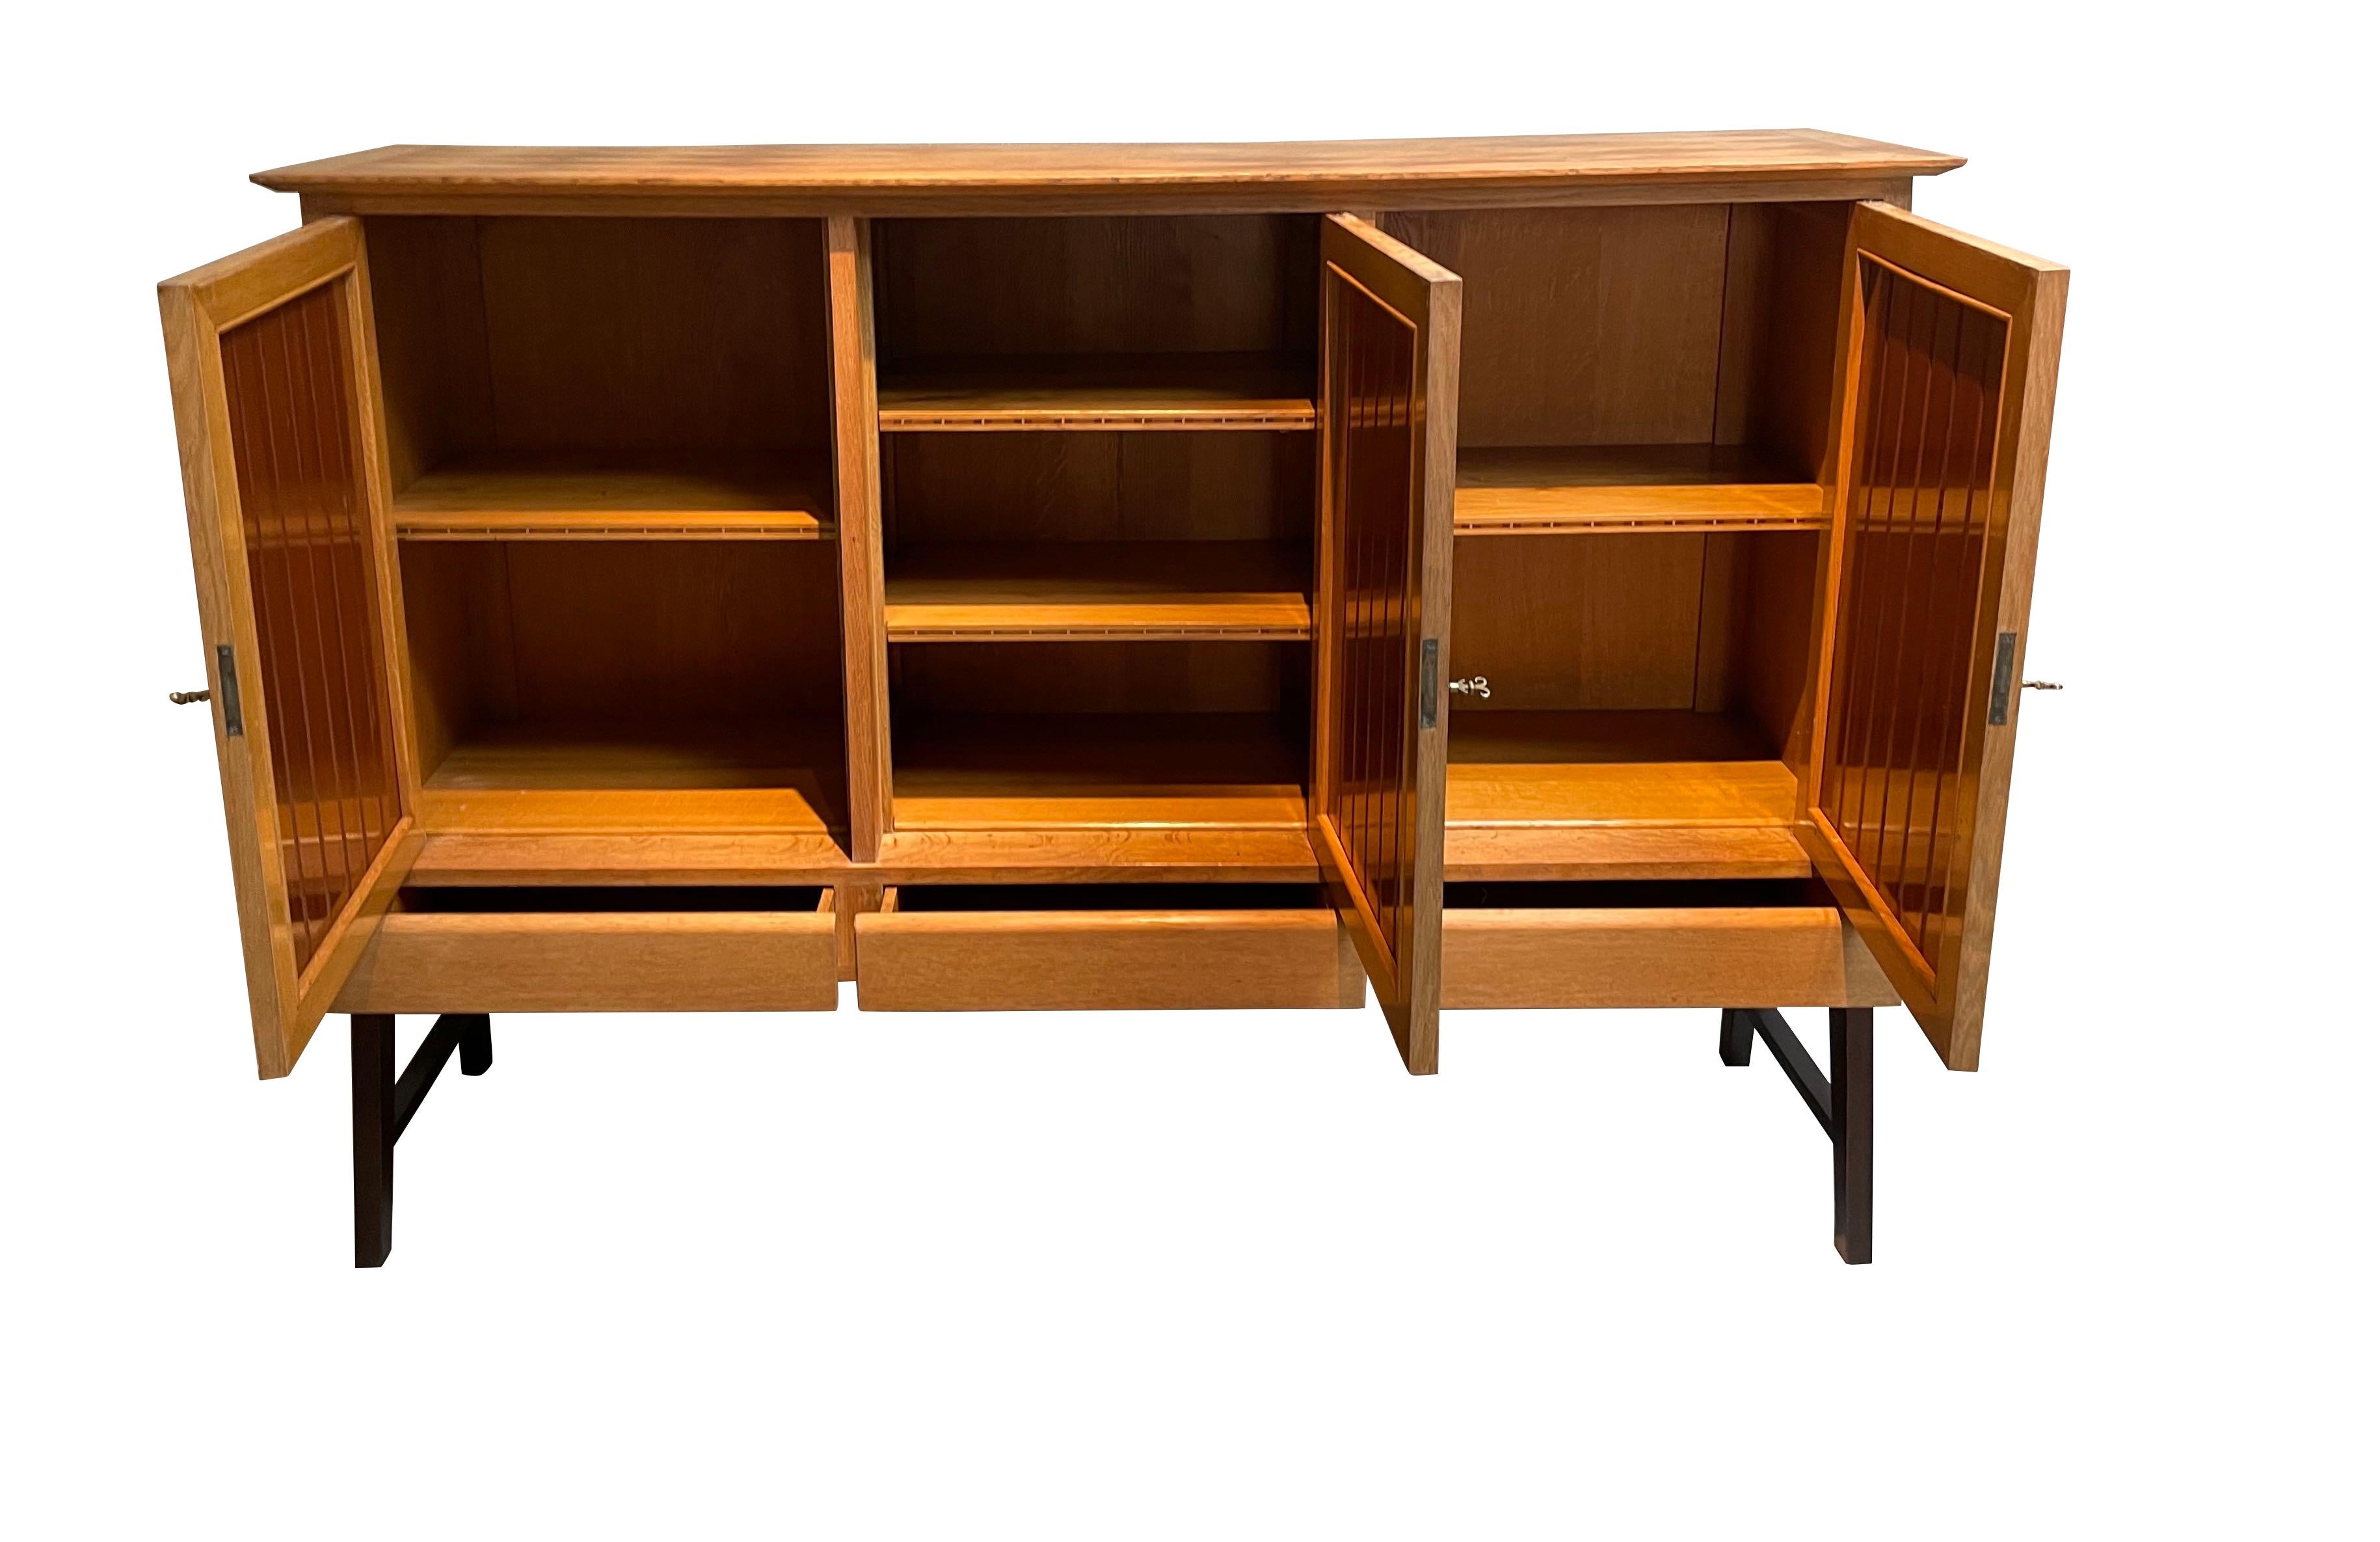 1950s' French Joseph - Andre Motte designed credenza.
Four fluted wooden doors in darker contrasting stained wood.
Credenza sits on angled footed base.
Decorative parquet top.
Three exterior drawers and four interior shelves.
Arriving November.